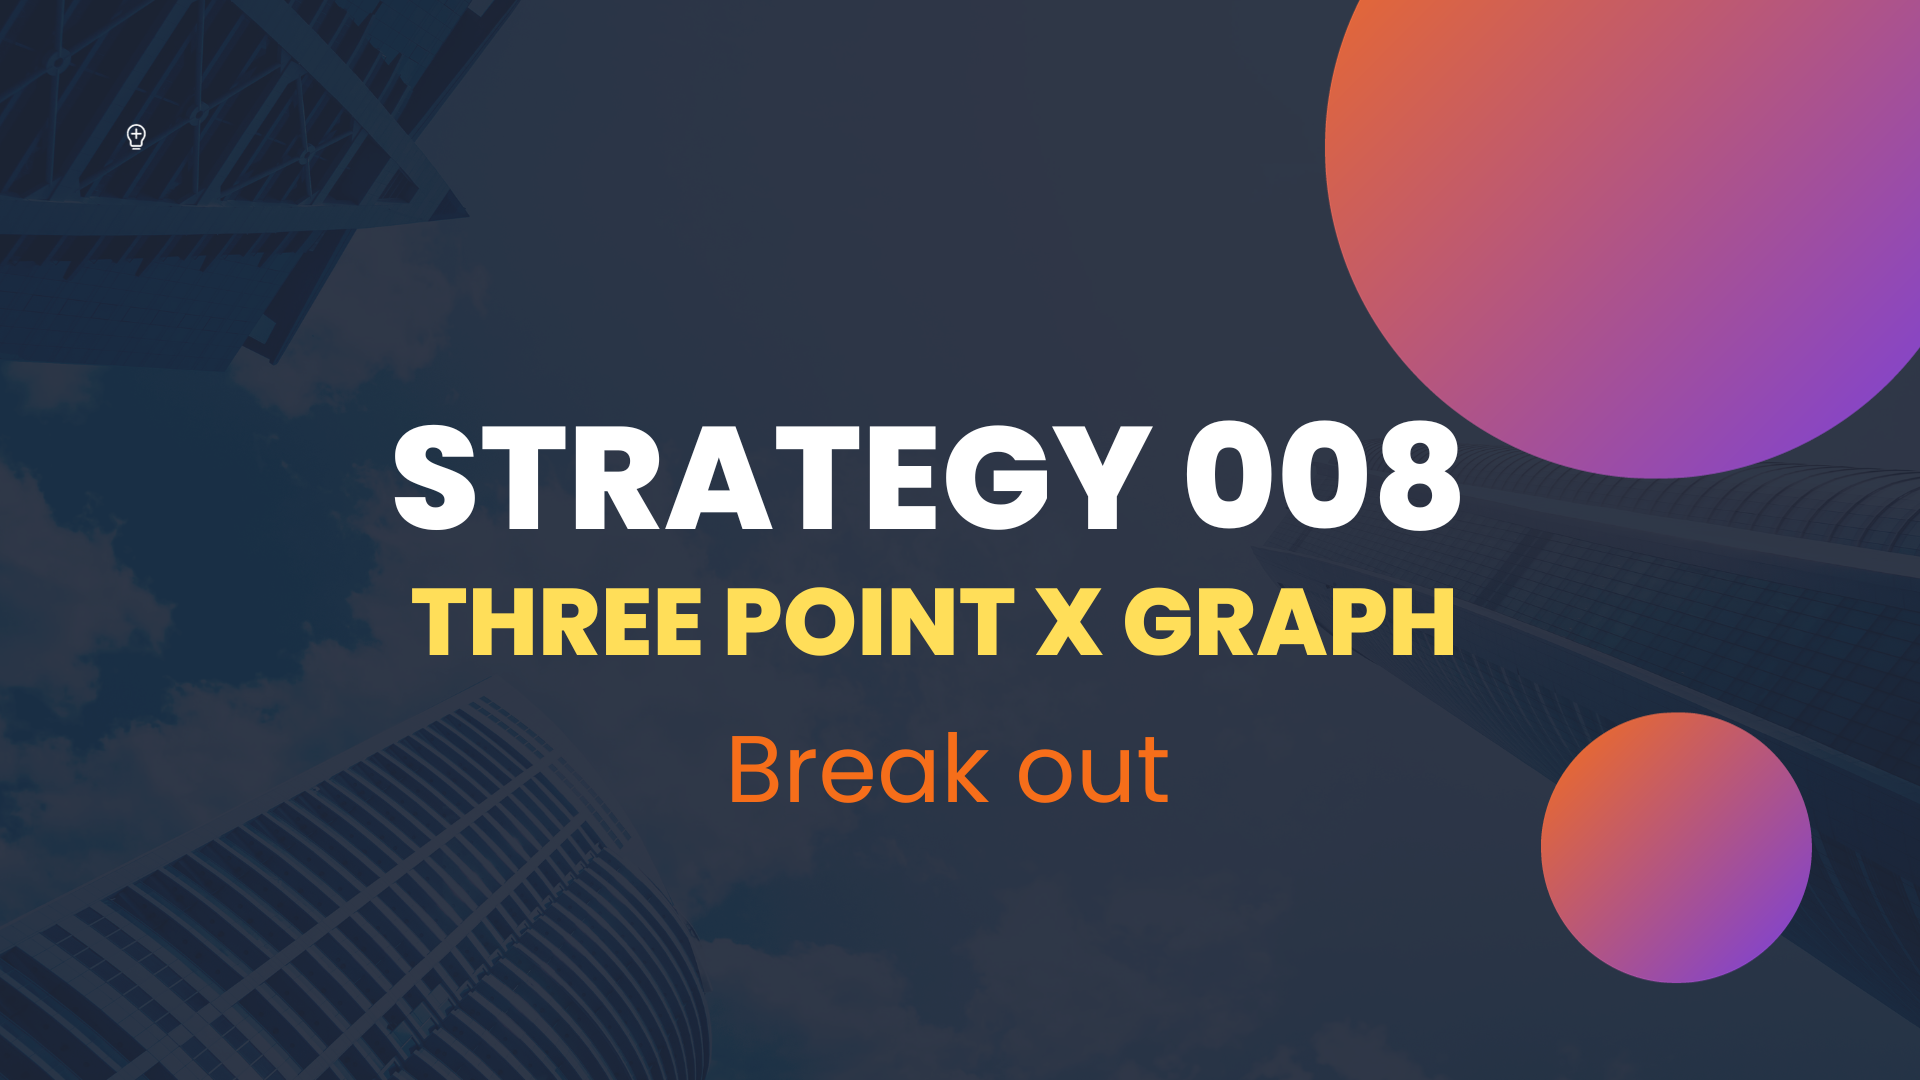 STRATEGY 008